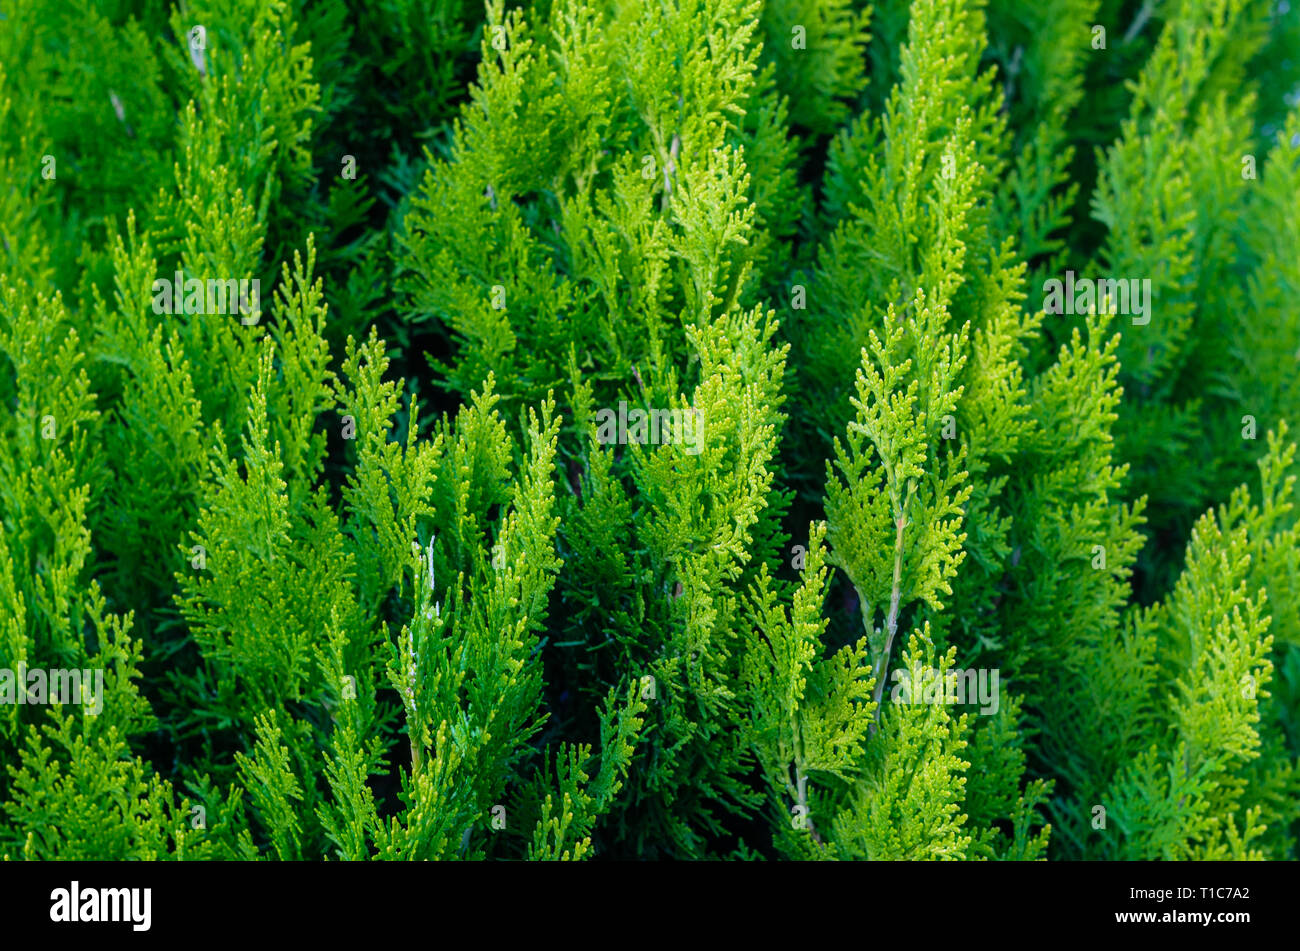 Thuja Coniferous Plant Texture. Green Floral Blank Background Stock Photo